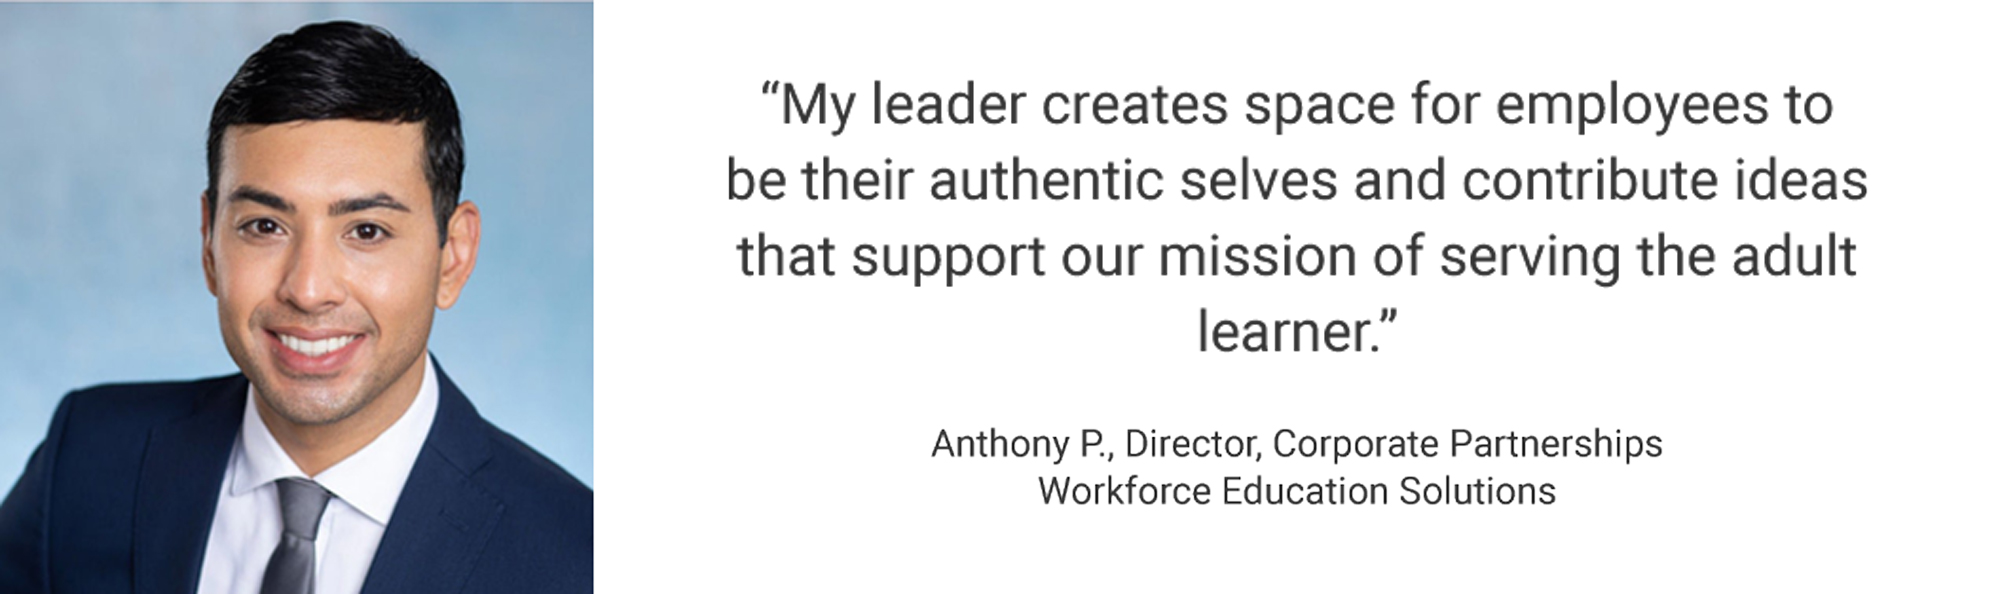 Employee Testimonial, "My leader creates space for employees to be their authentic selves and contribute ideas that support our mission of serving the adult learner." Anthony P. - Director, Corporate Partnerships- Workforce Education Solutions